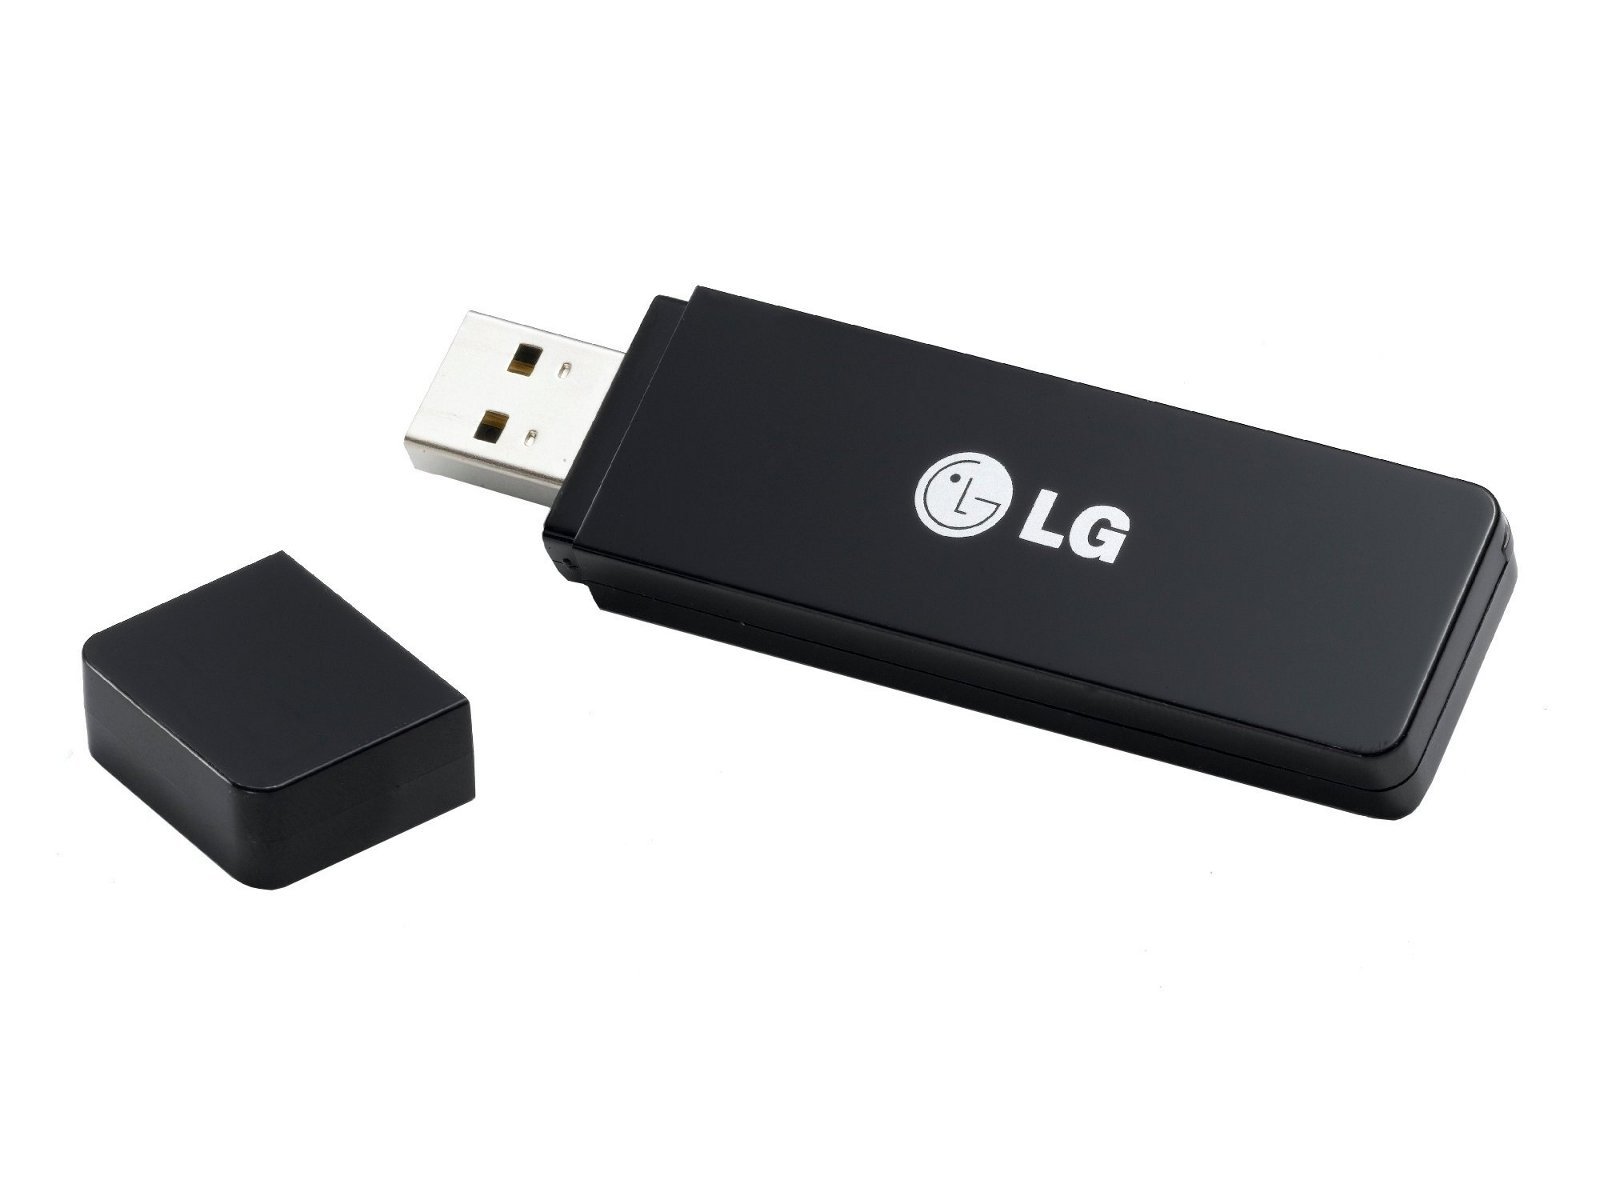 where-can-i-buy-a-lg-wireless-dongle